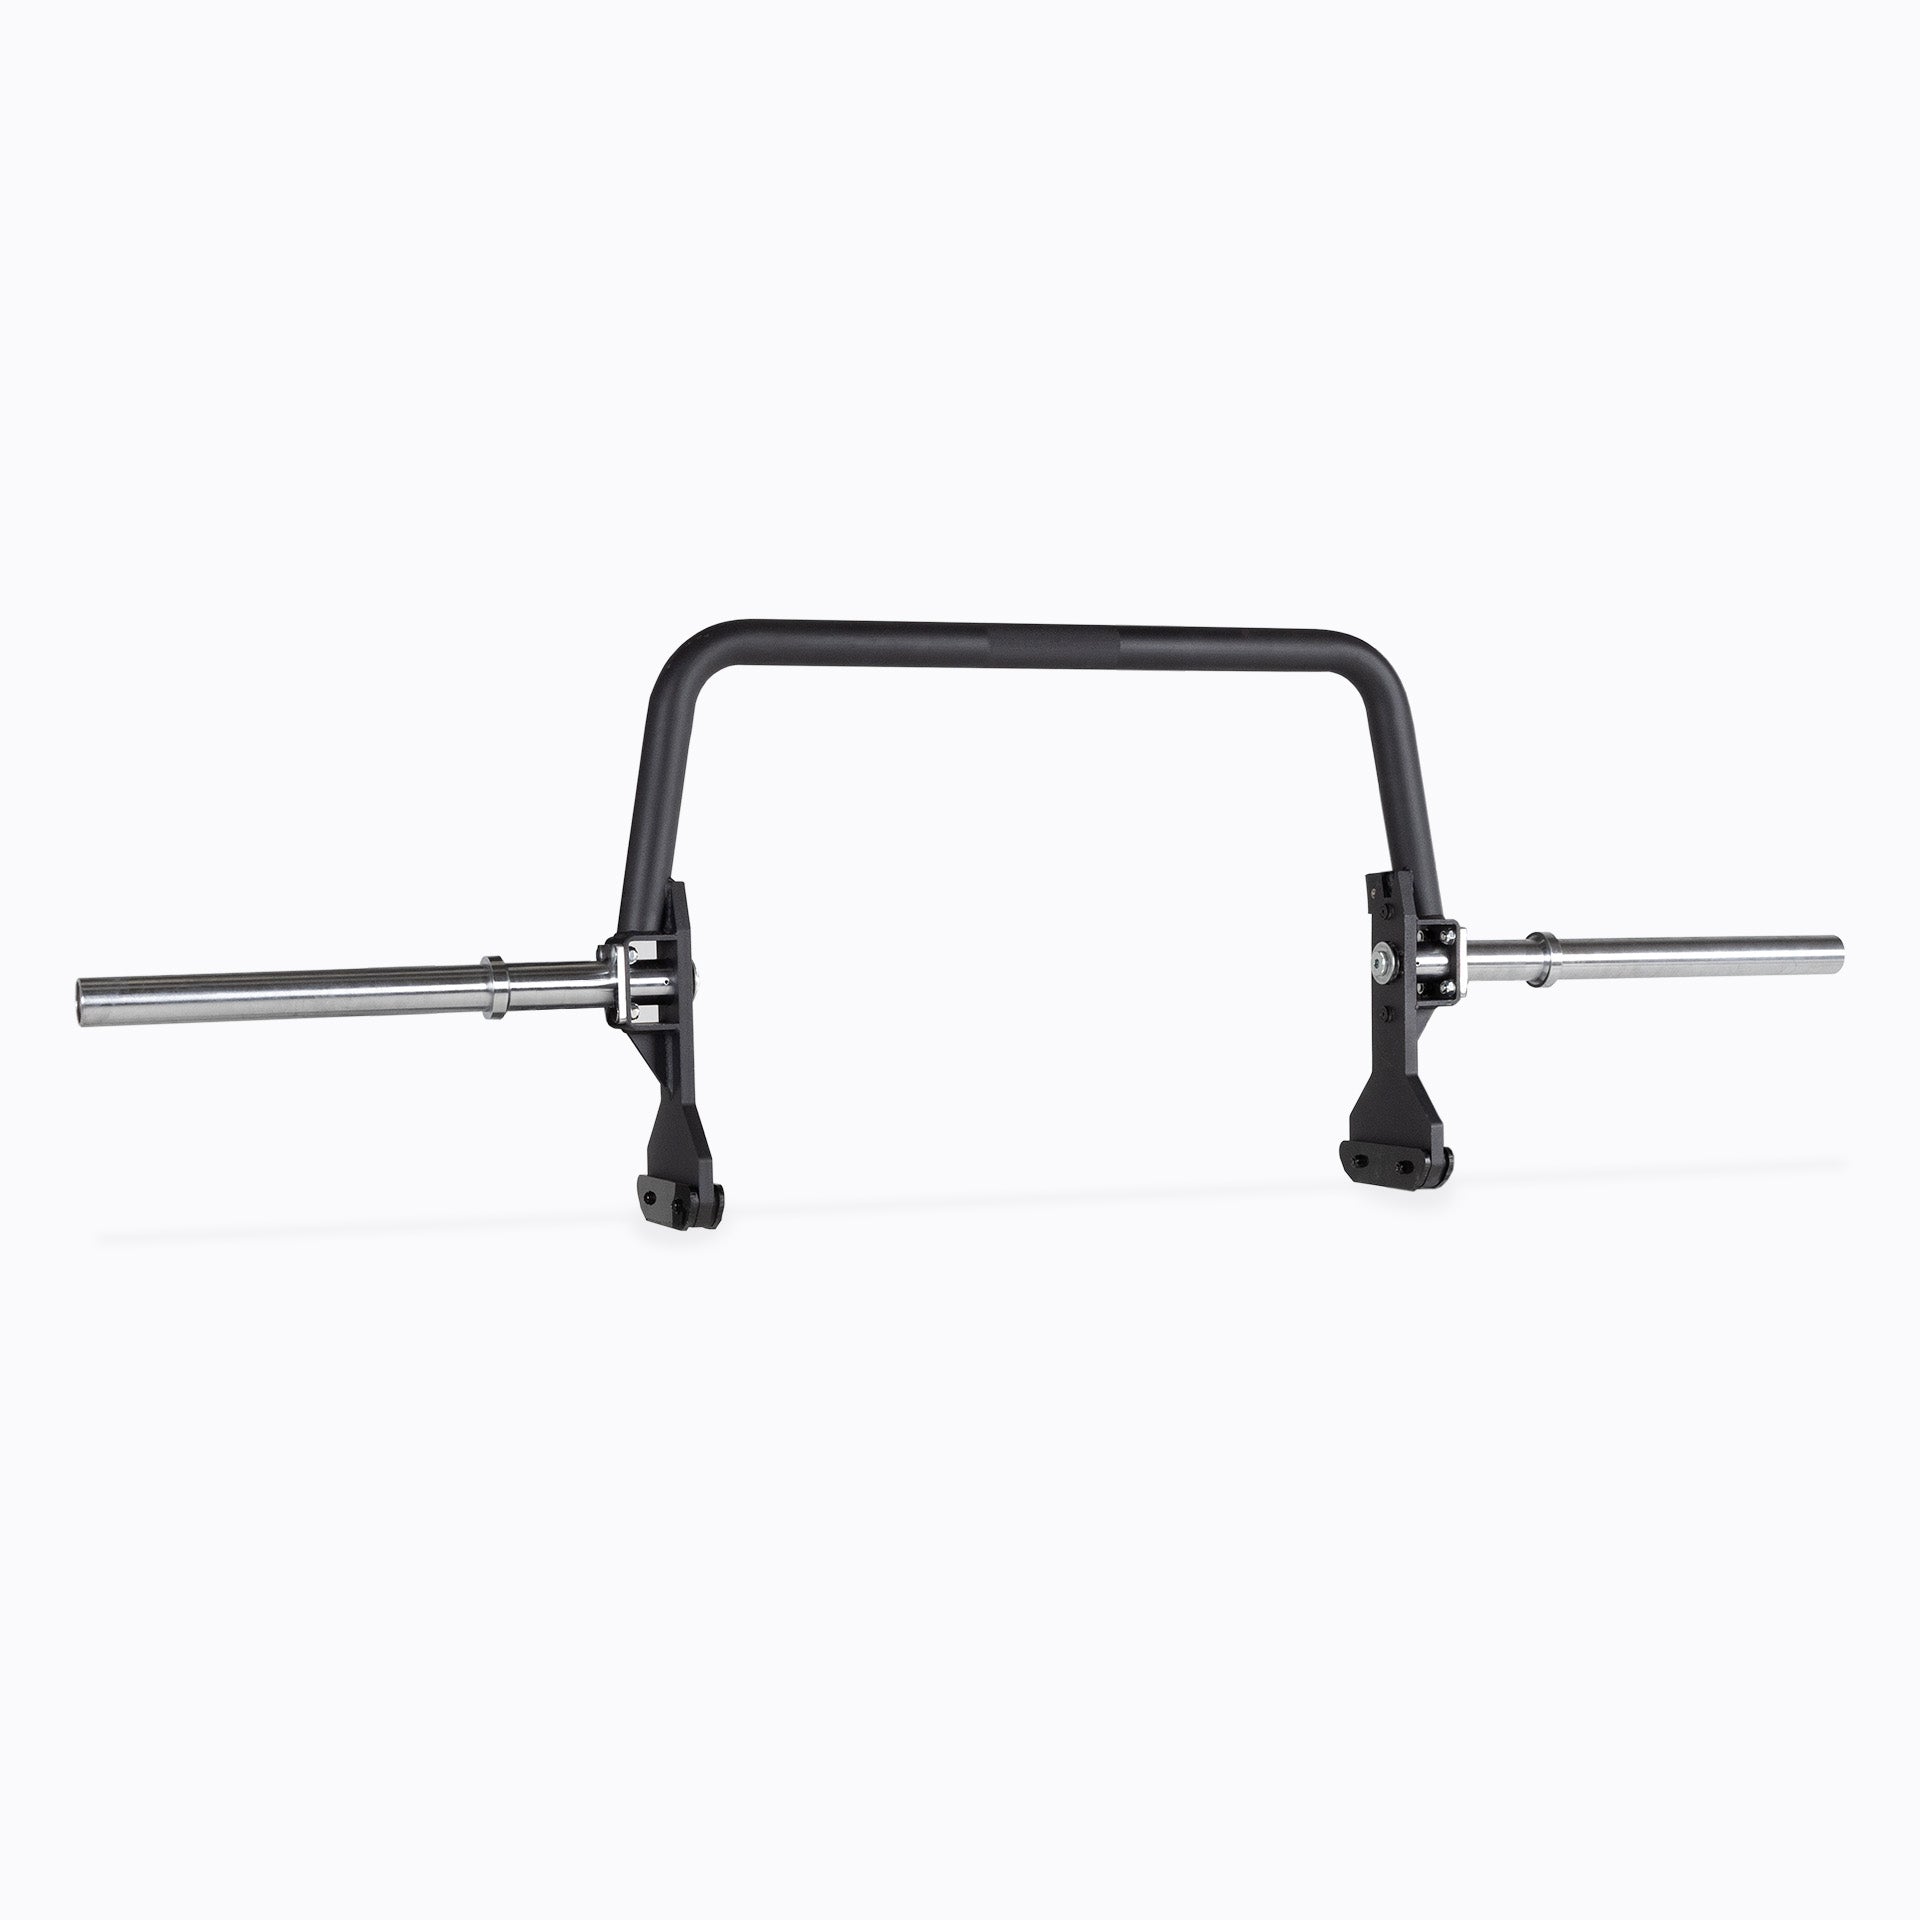 Open Trap Bar Frame standing vertically on it's integrated deadlift jack.